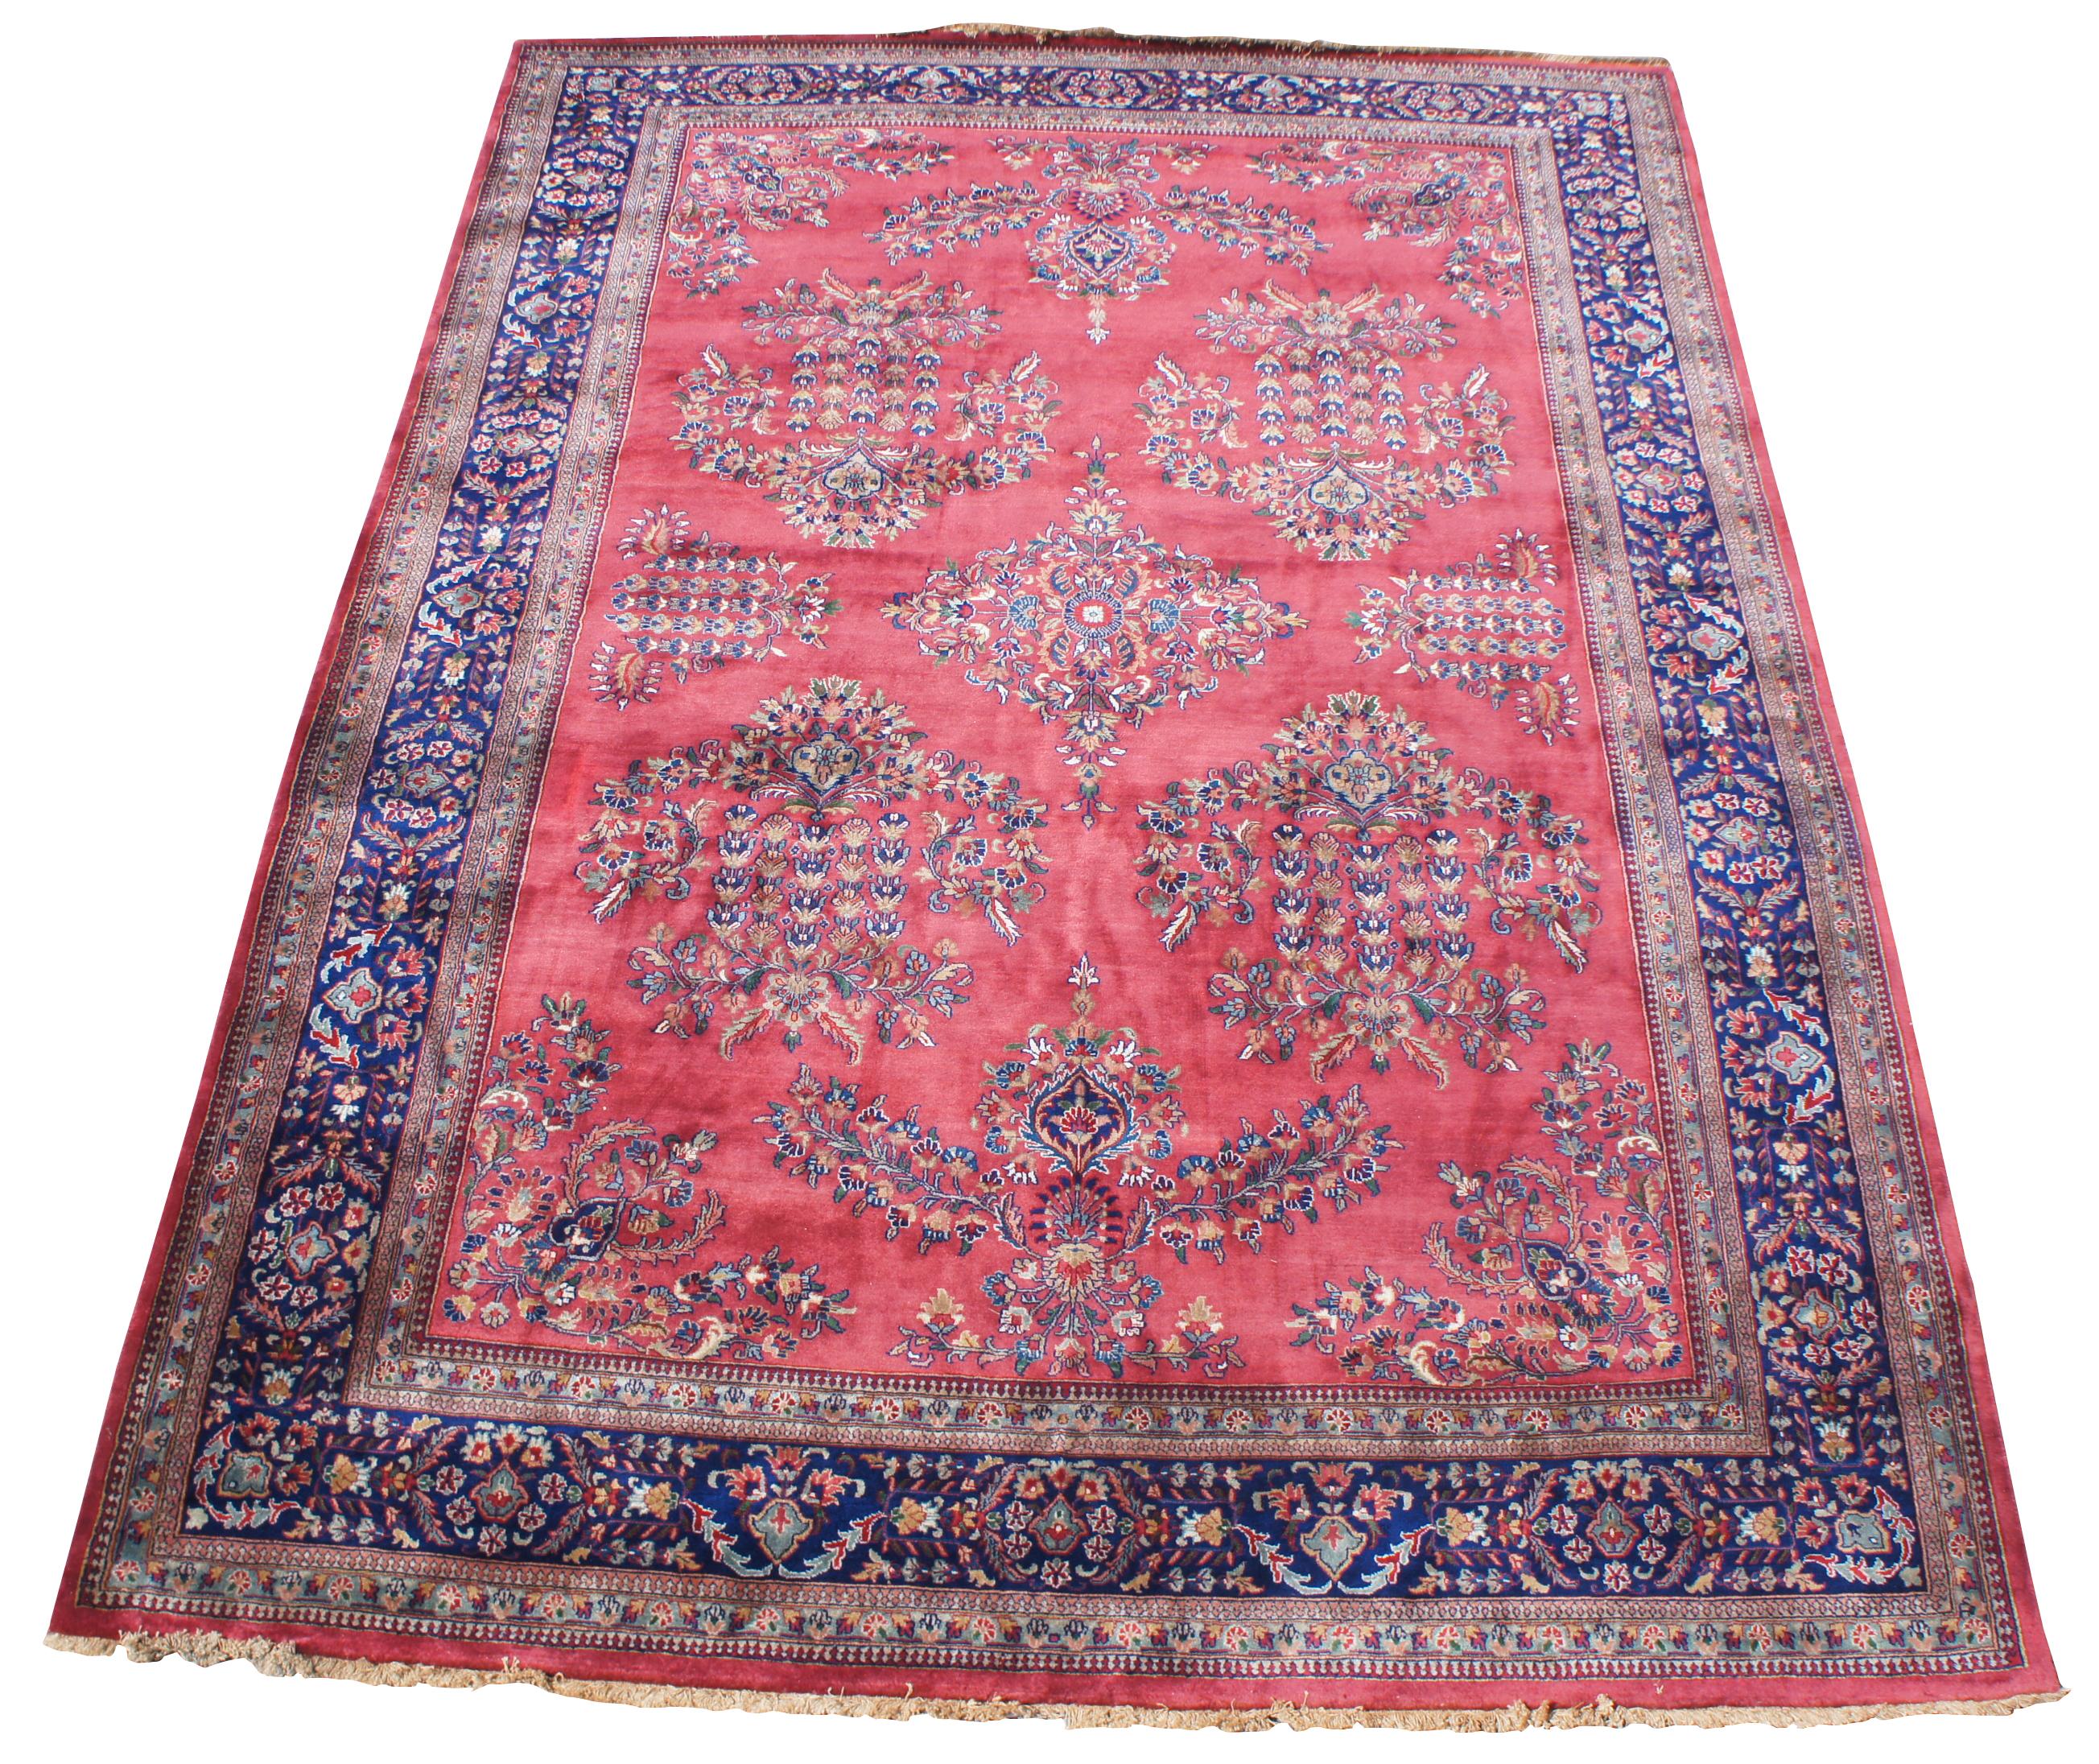 Antique hand knotted Sarugh area rug. Features a field of red with a floral spray of medallions and all over floral design, framed by a indigo / blue / purple border. Features blues, purples, reds, pinks, green and cream / beige. Measures: 9' x